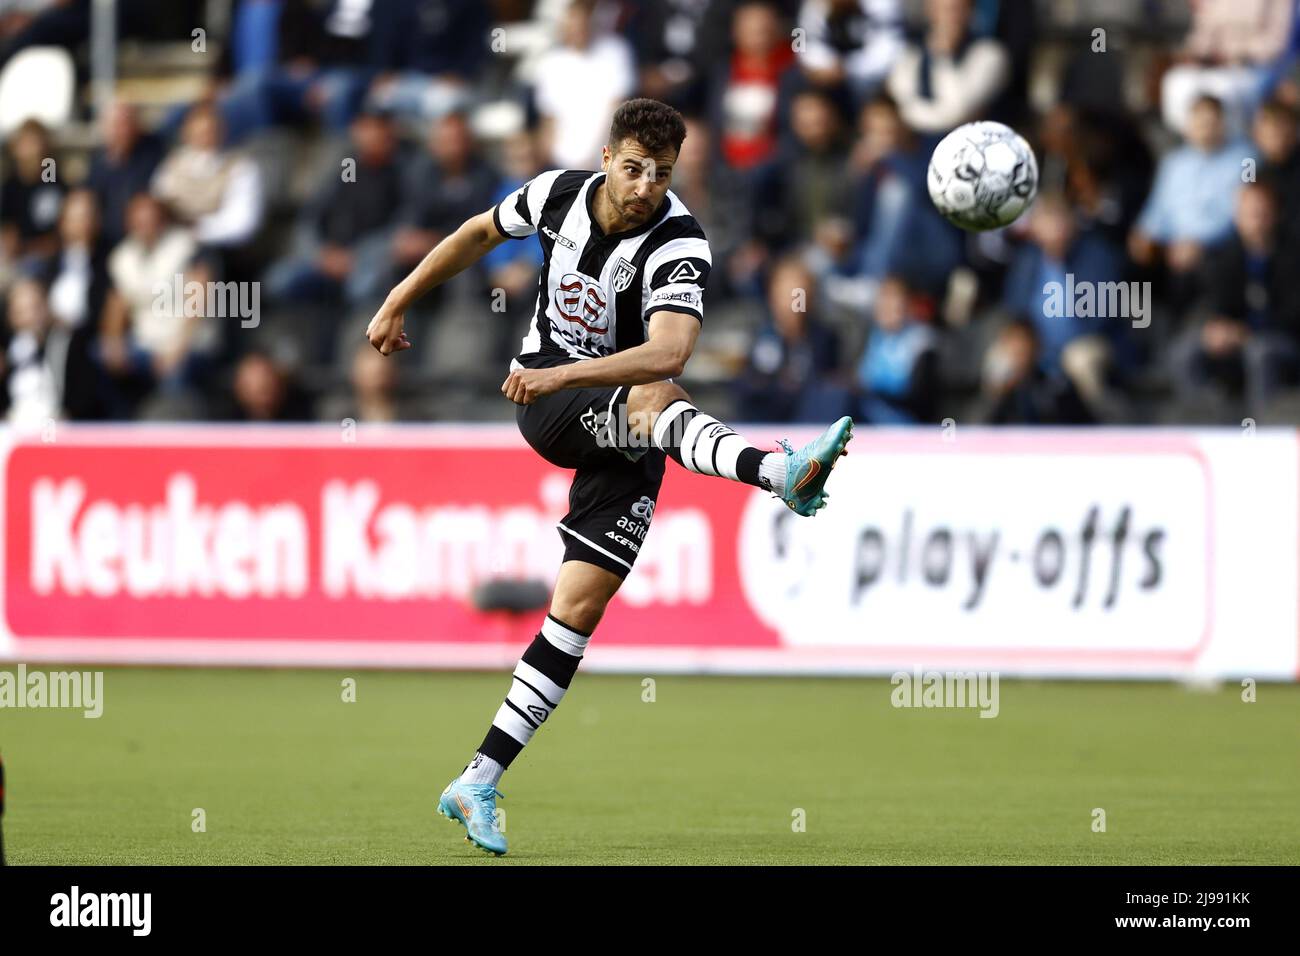 ALMELO - Sinan Bakis of Heracles Almelo during the Dutch play-off promotion/relegation match between Heracles Almelo and Excelsior at the Erve Asito stadium on May 21, 2022 in Almelo, Netherlands. ANP VINCENT JANNINK Stock Photo